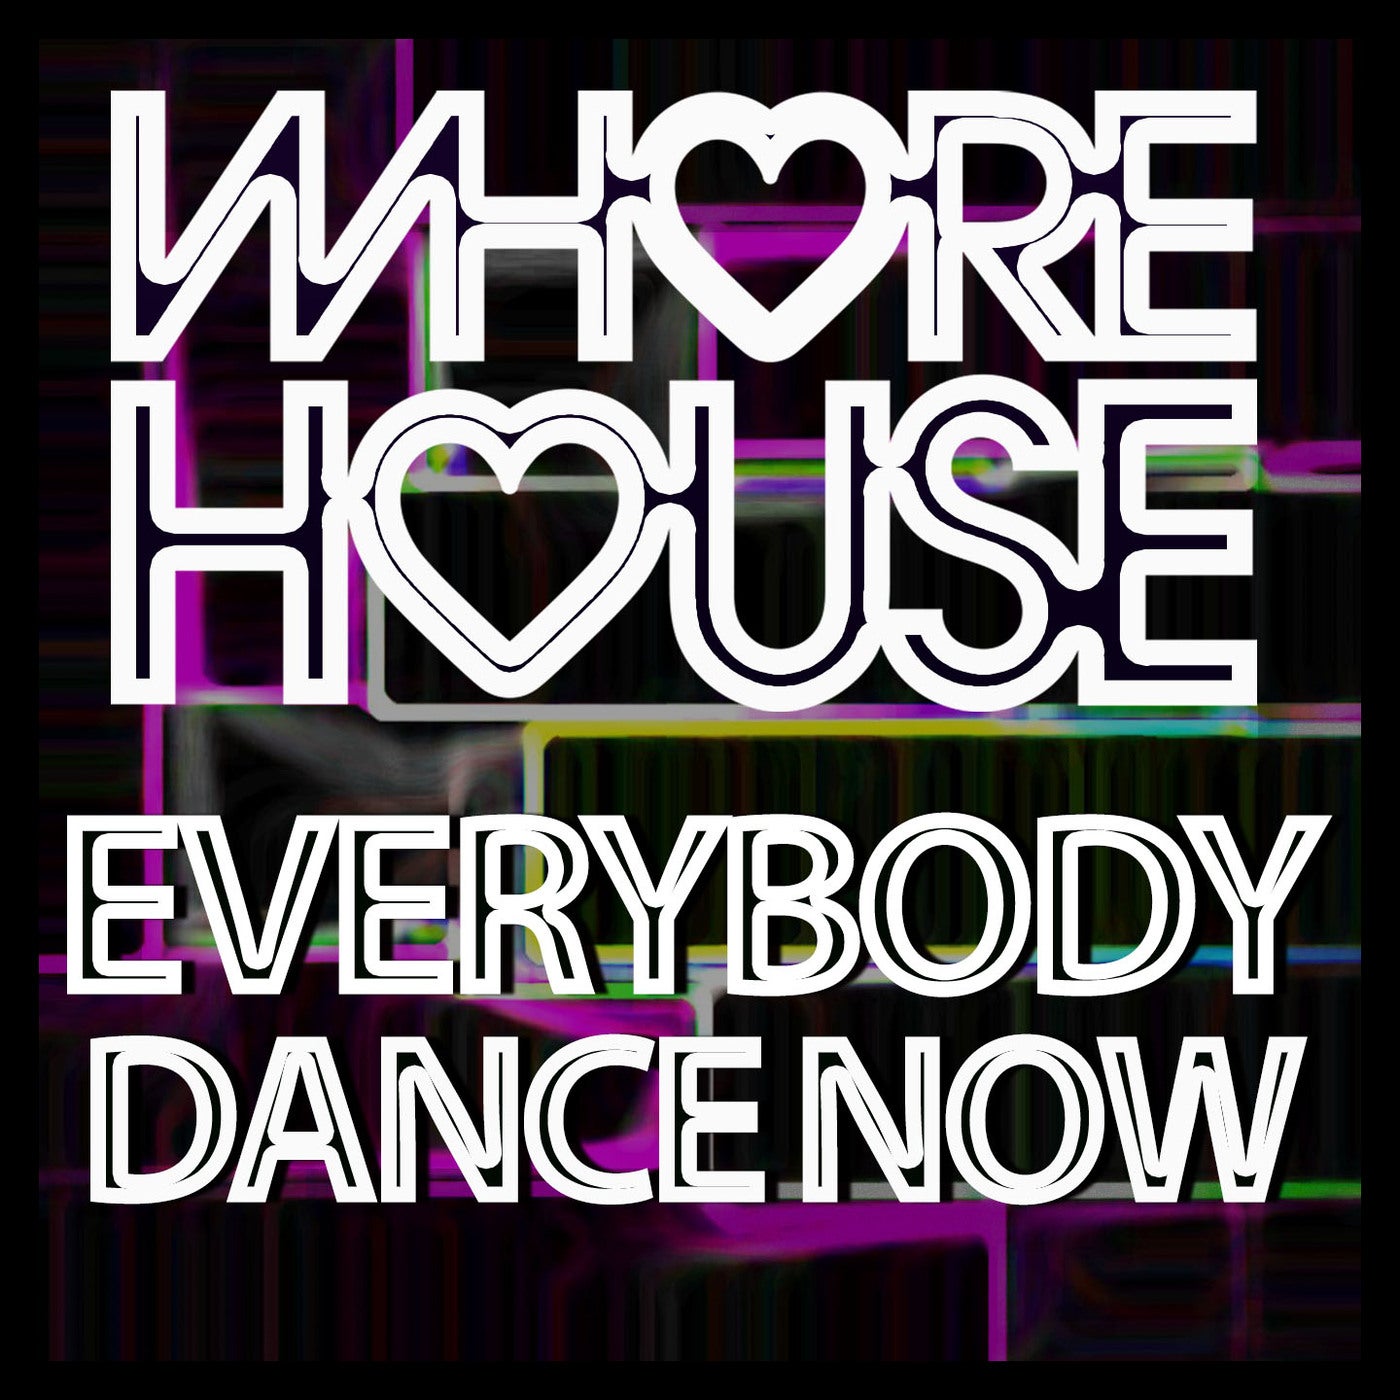 Whore House Everybody Dance Now